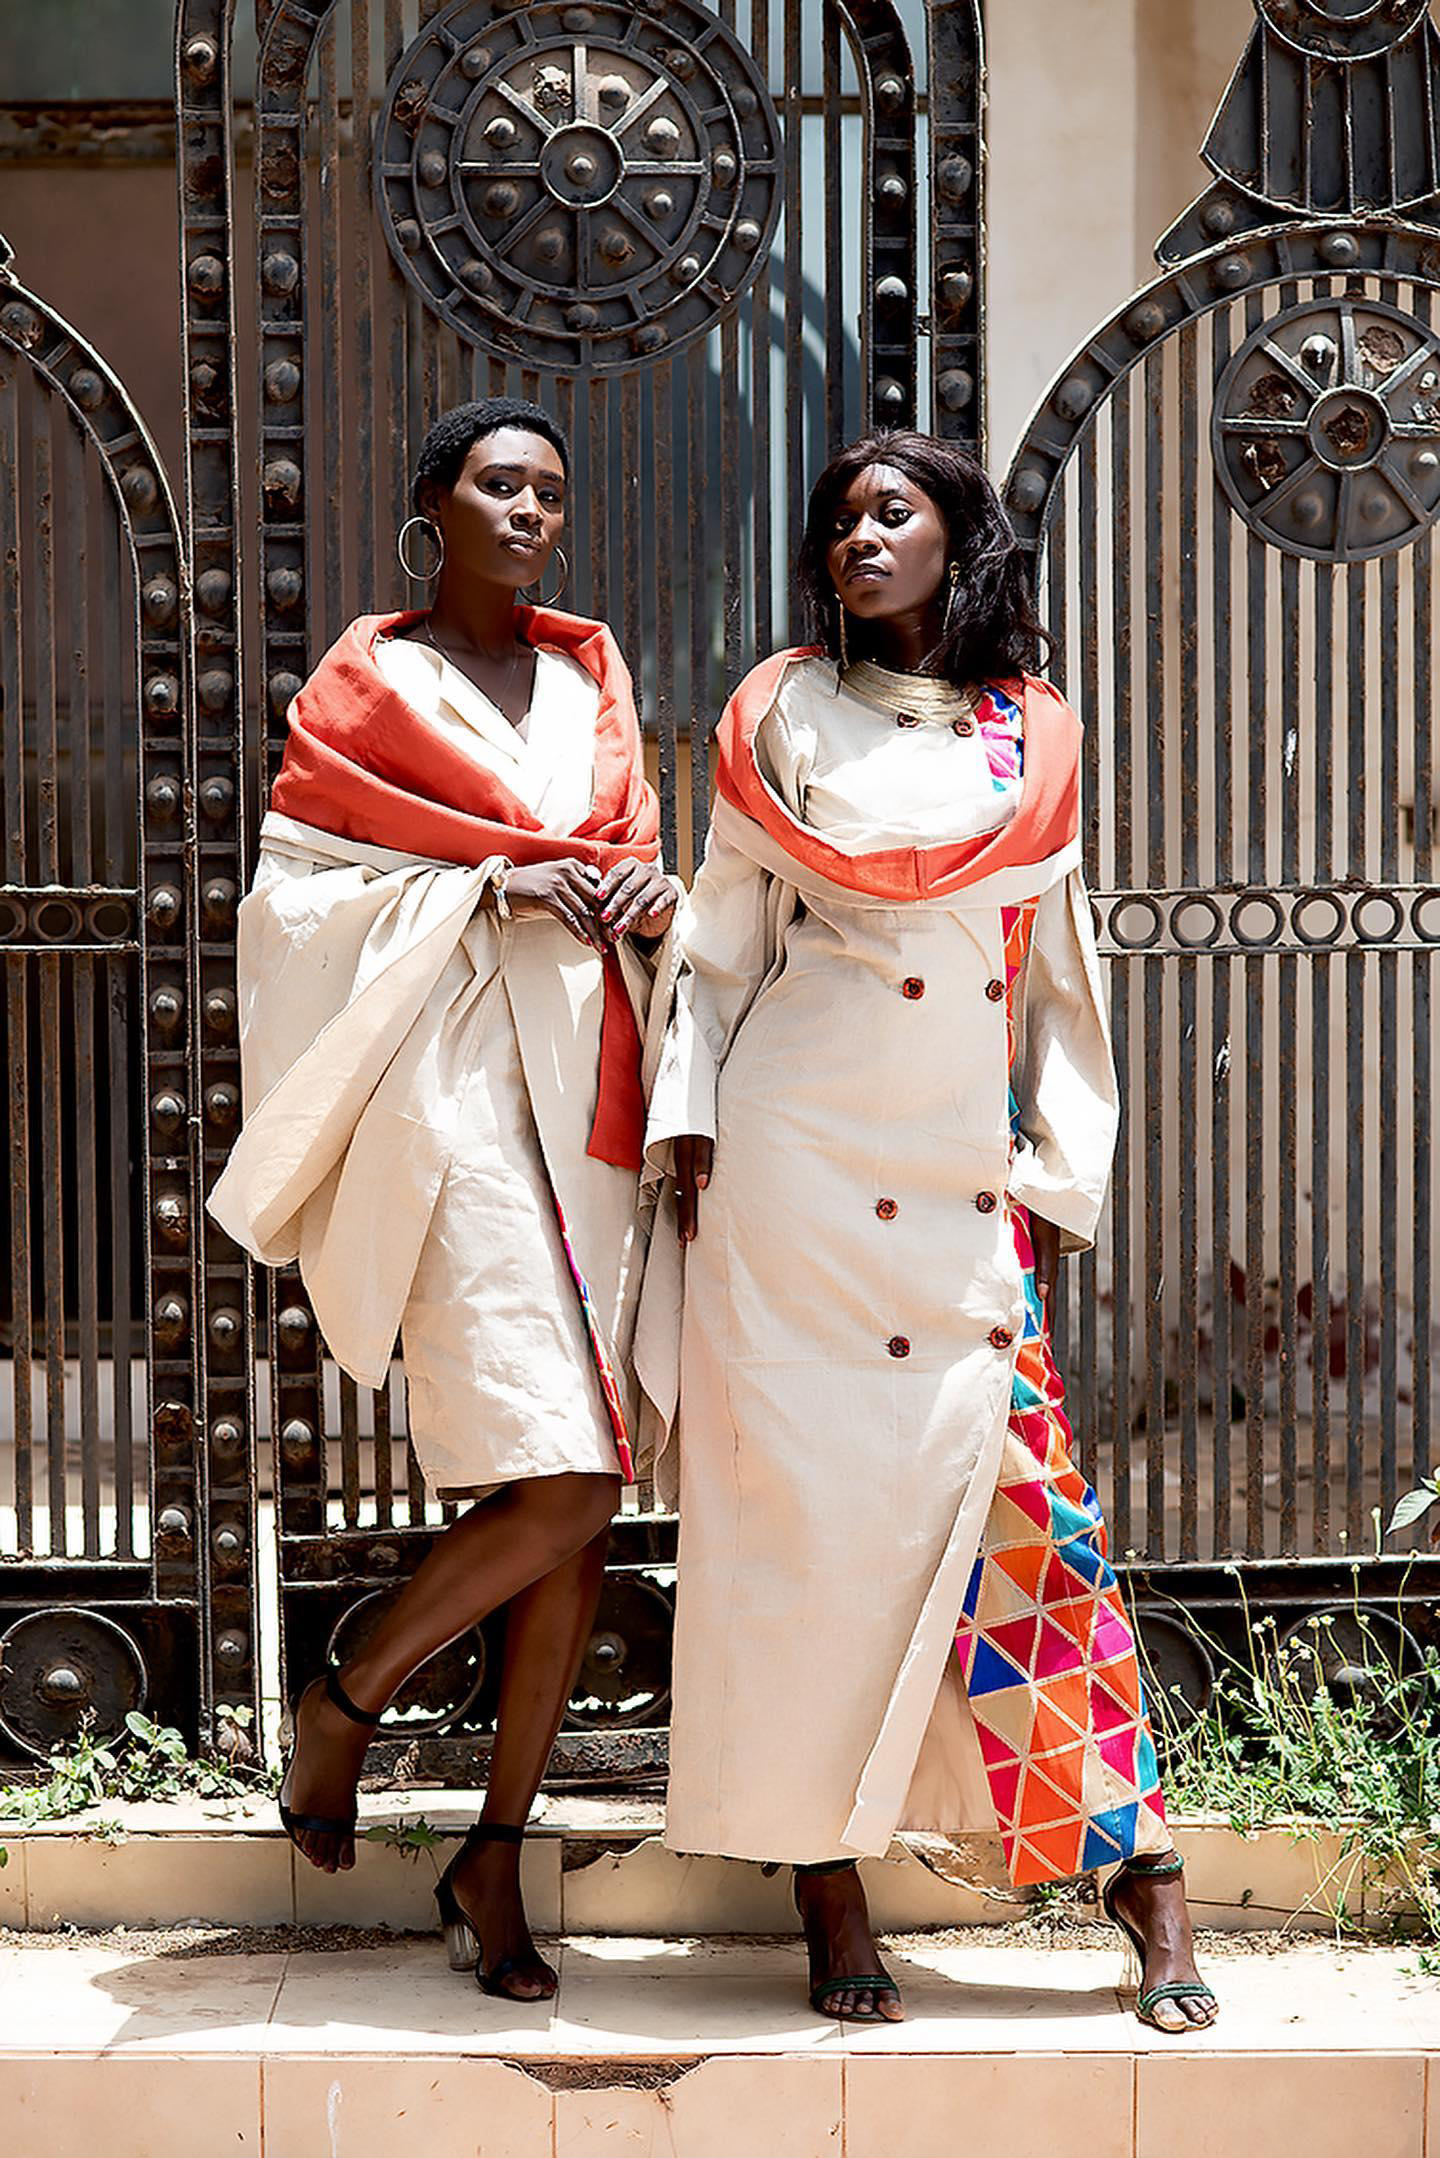 NF DESIGN - 3RD  COLLECTION – BOUR AK LINGUERE - MEANING THE KING AND THE QUEEN - LOOK-4 & 5 - Pierre de PEROUGES Photograph